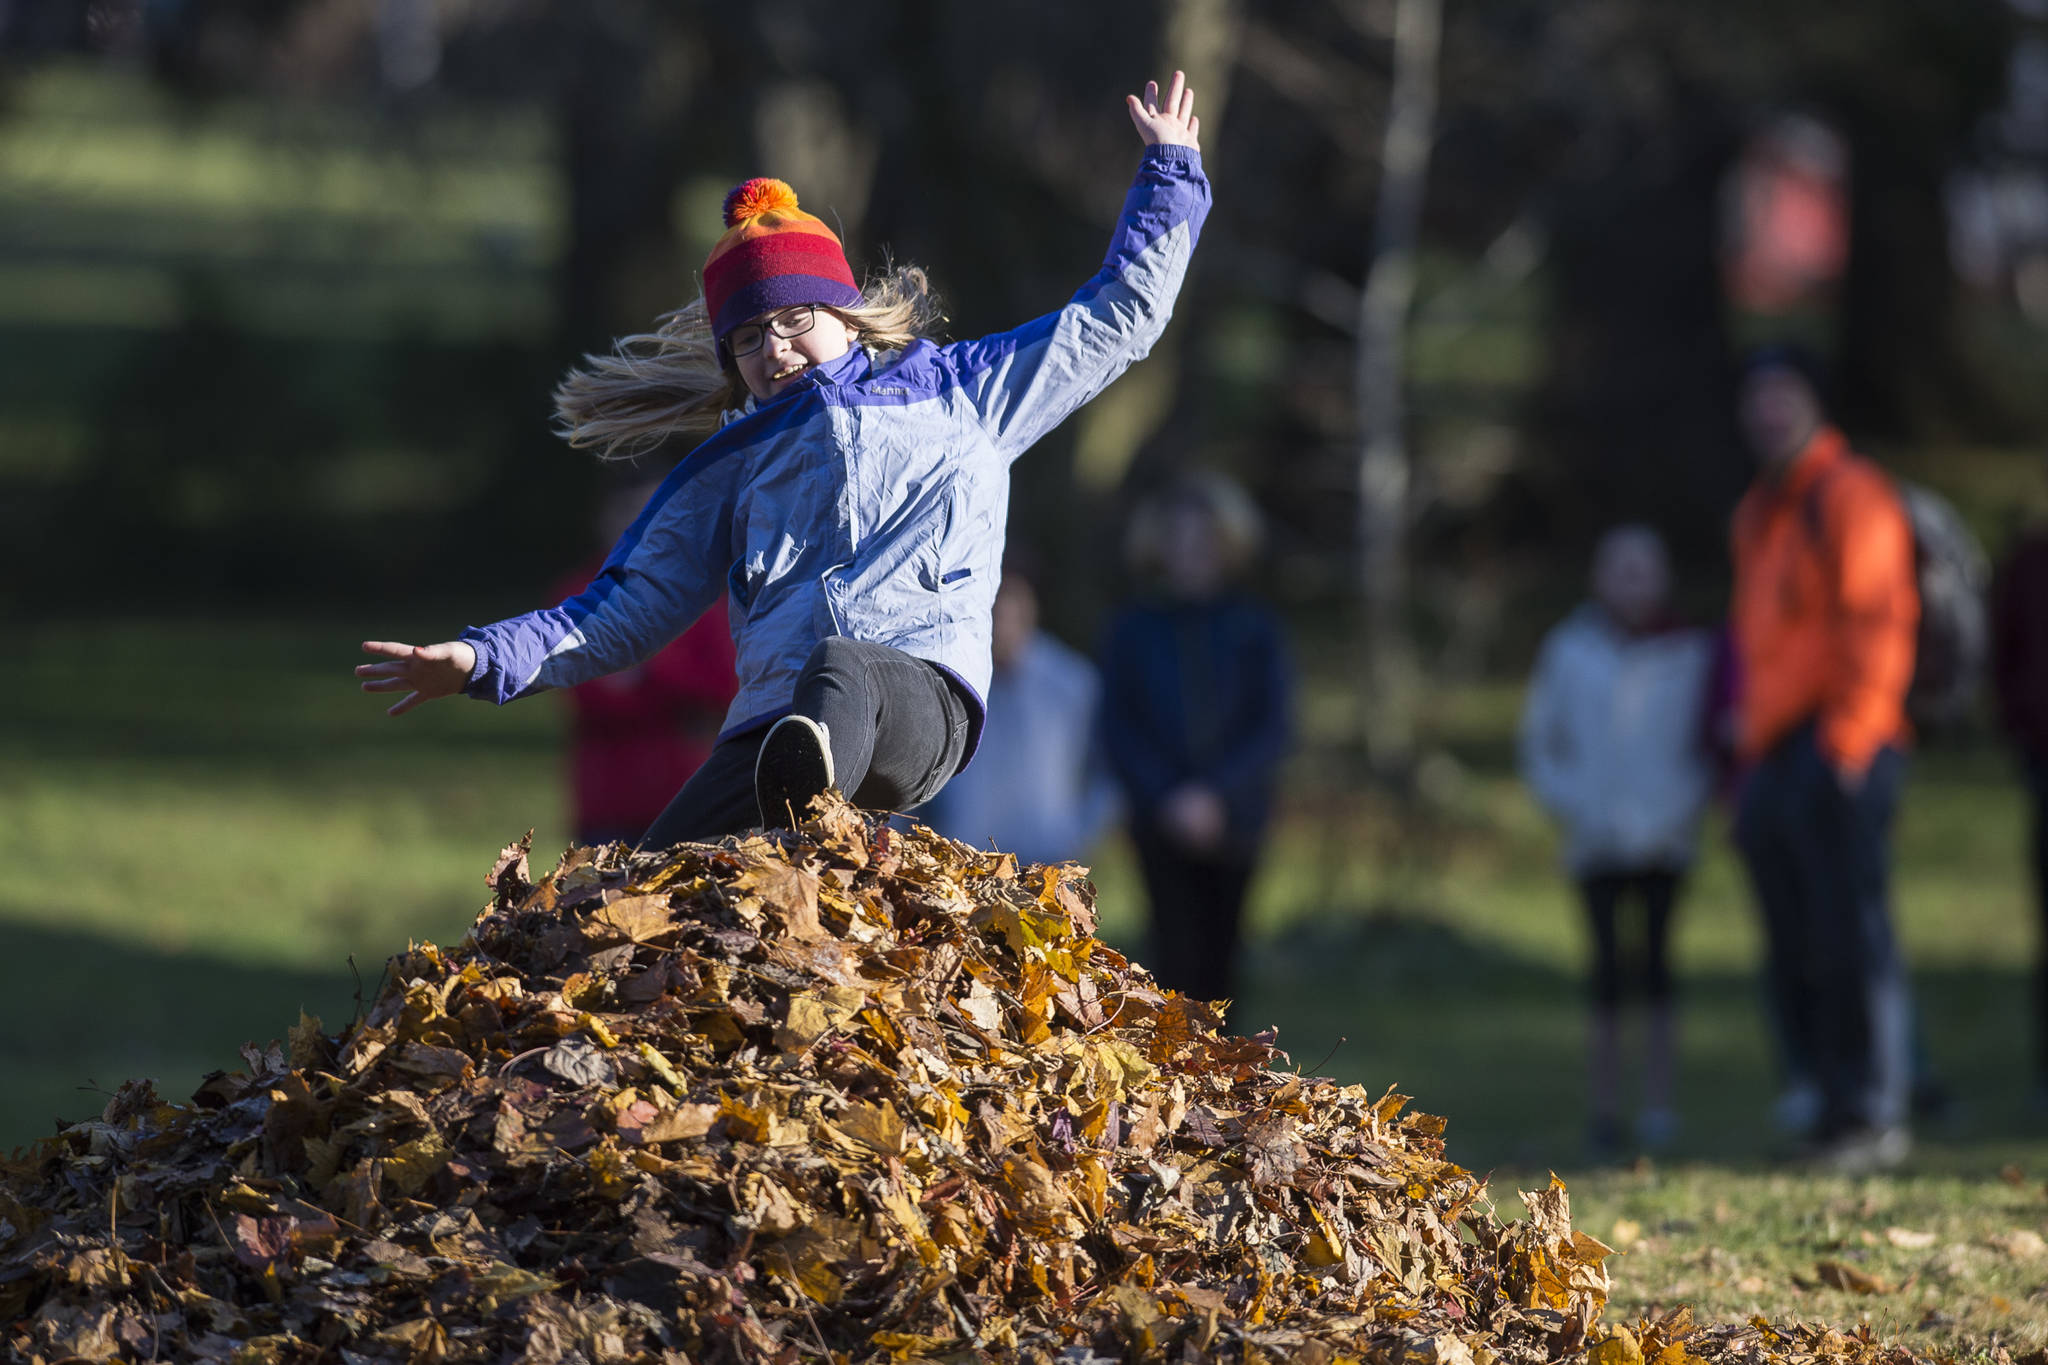 Juneau Community Charter School seventh-graders Meadow Stanley, left, Jade Hicks, Maisy Morley and Cedar Corteau, right, play in a pile of dry leaves during a outing at Evergreen Cemetery on Tuesday, Nov. 6, 2018. Retired teacher Linda Torgerson organizes the leaf jump every year which allows local students the fall activity. (Michael Penn | Juneau Empire)